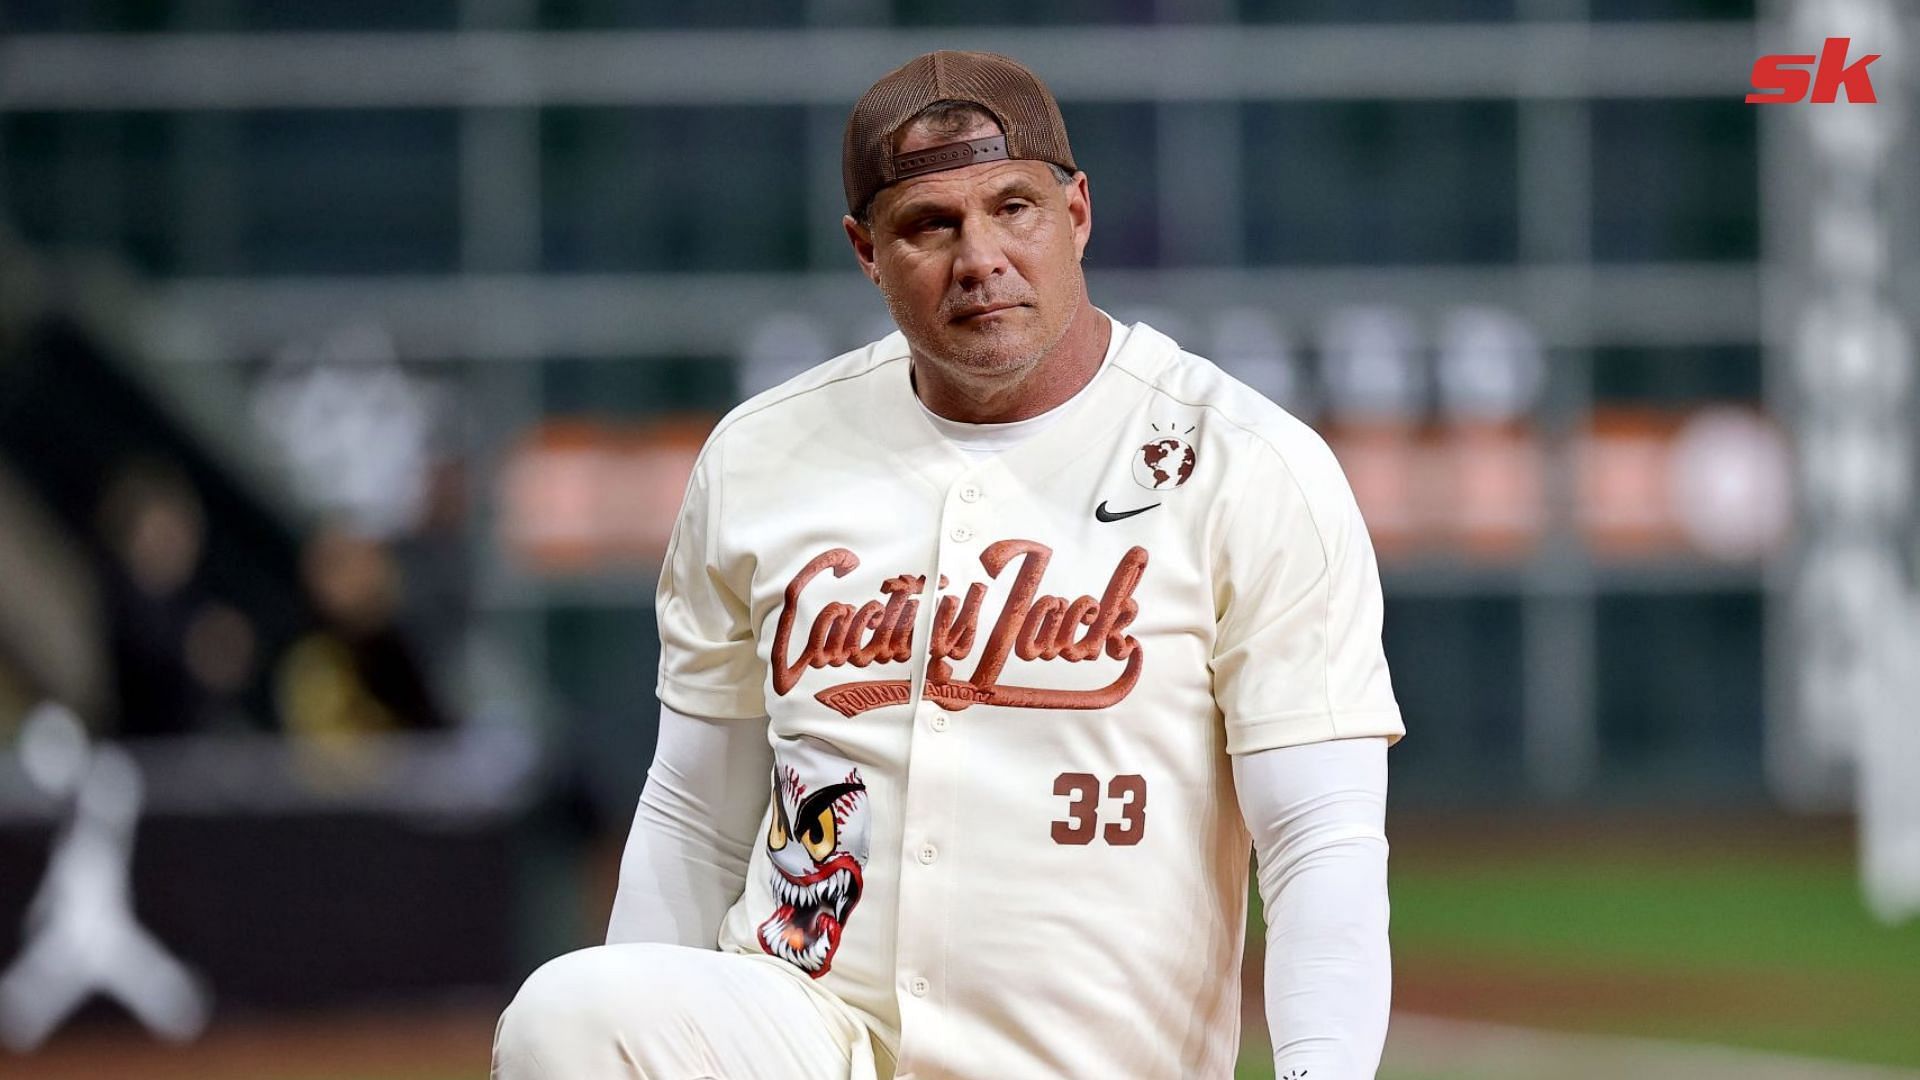 When Jose Canseco was left speechless by Bret Boone